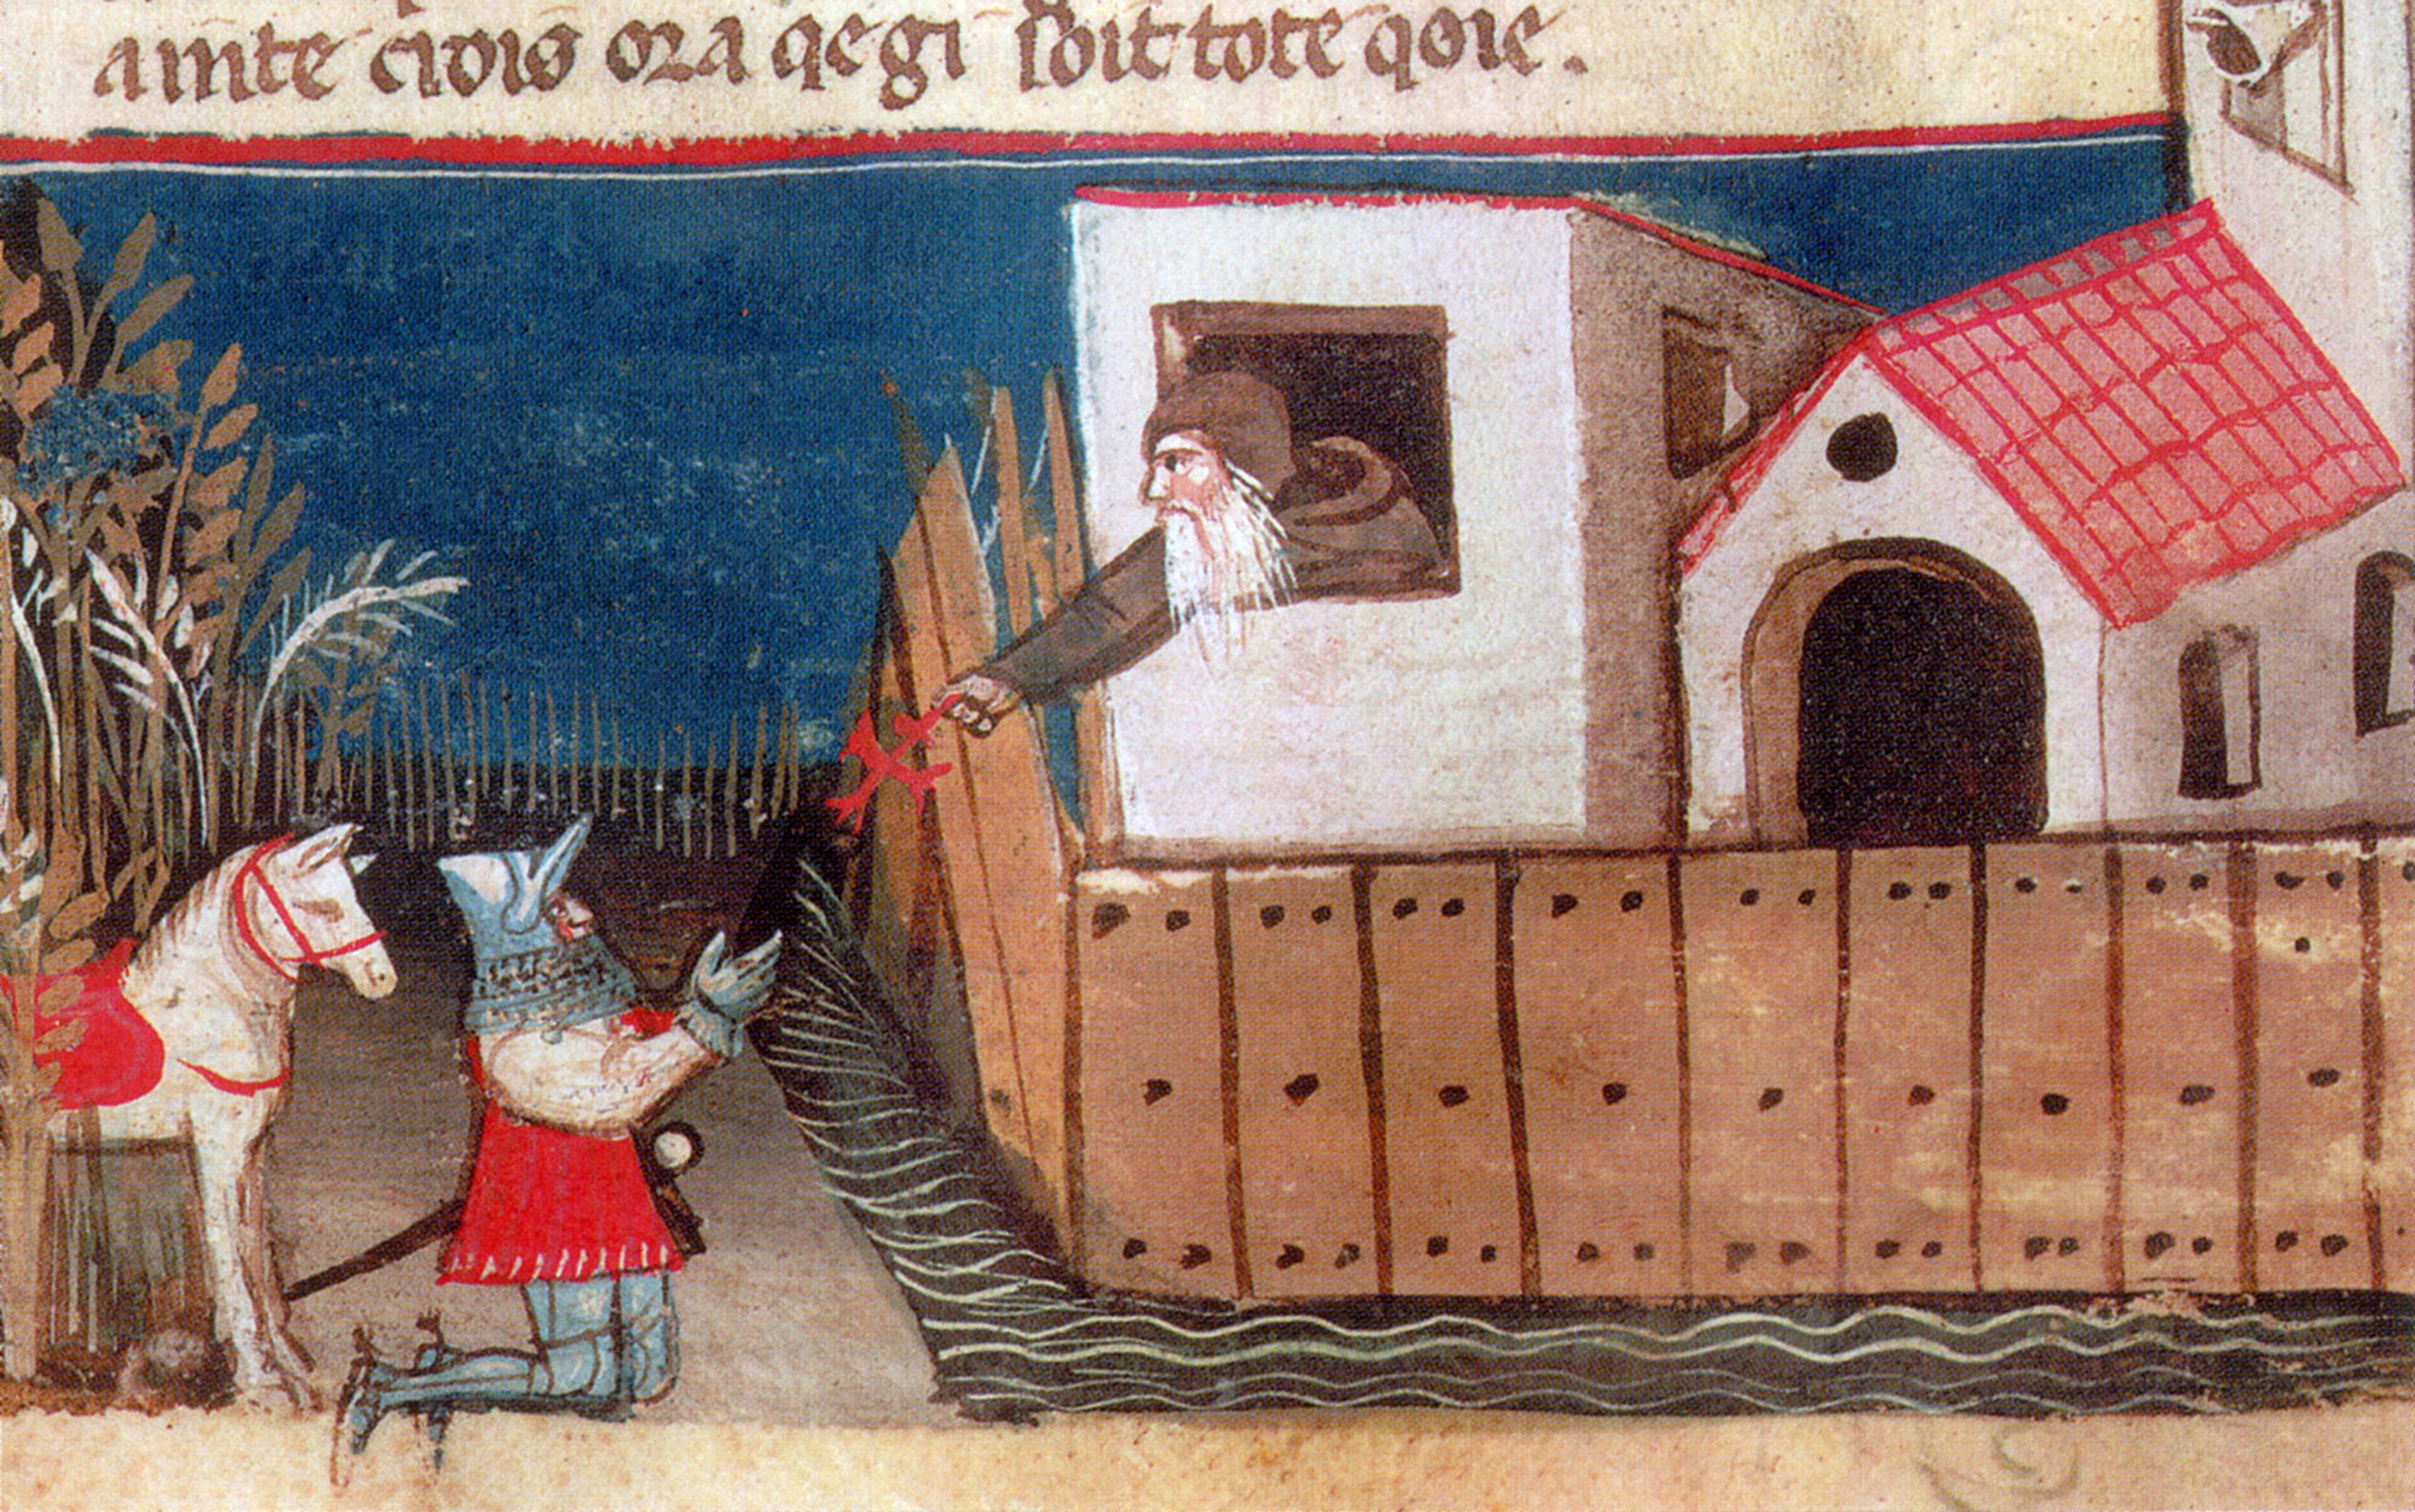 Medieval illustration shows a knight kneeling before a monk in a building, receiving a cross-shaped item; a horse stands nearby.